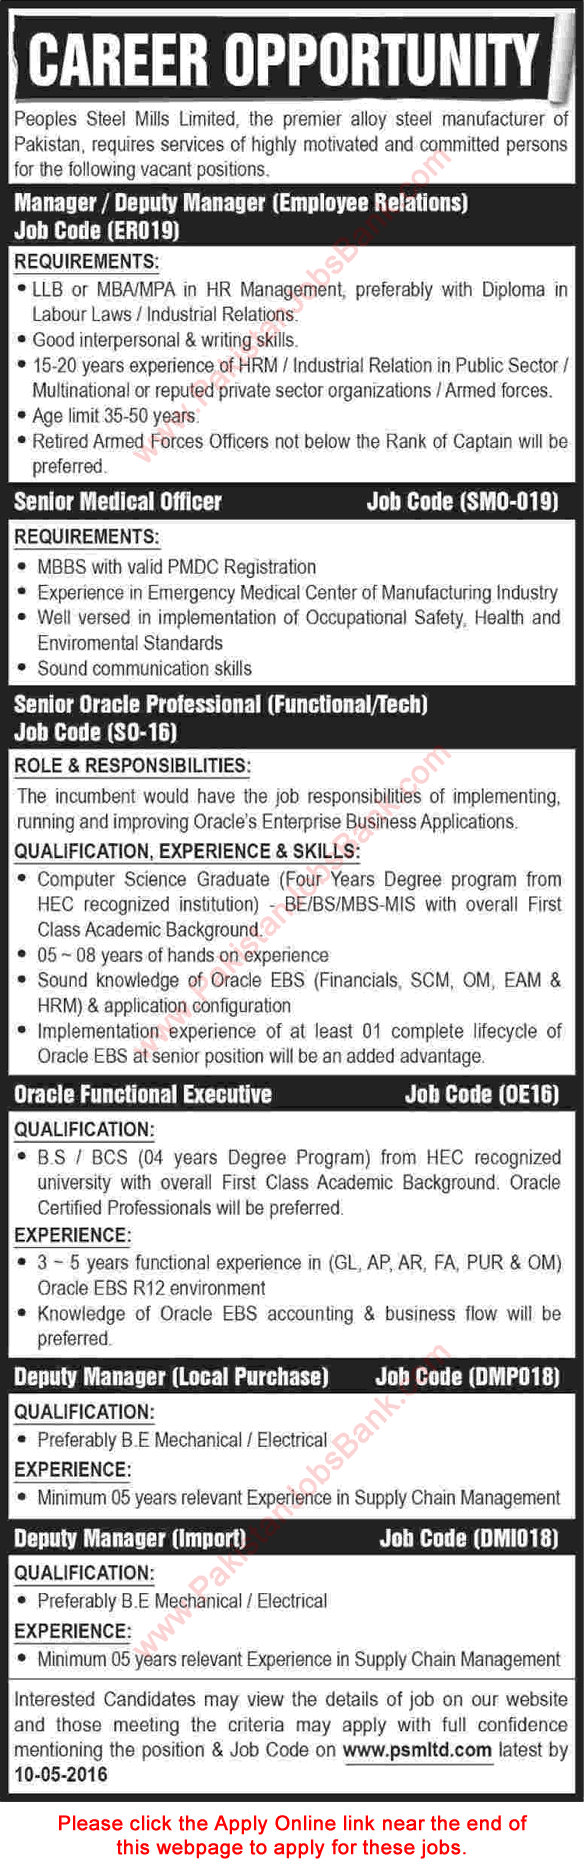 Peoples Steel Mills Jobs April 2016 Apply Online Managers, Medical Officer & Oracle Professionals Latest